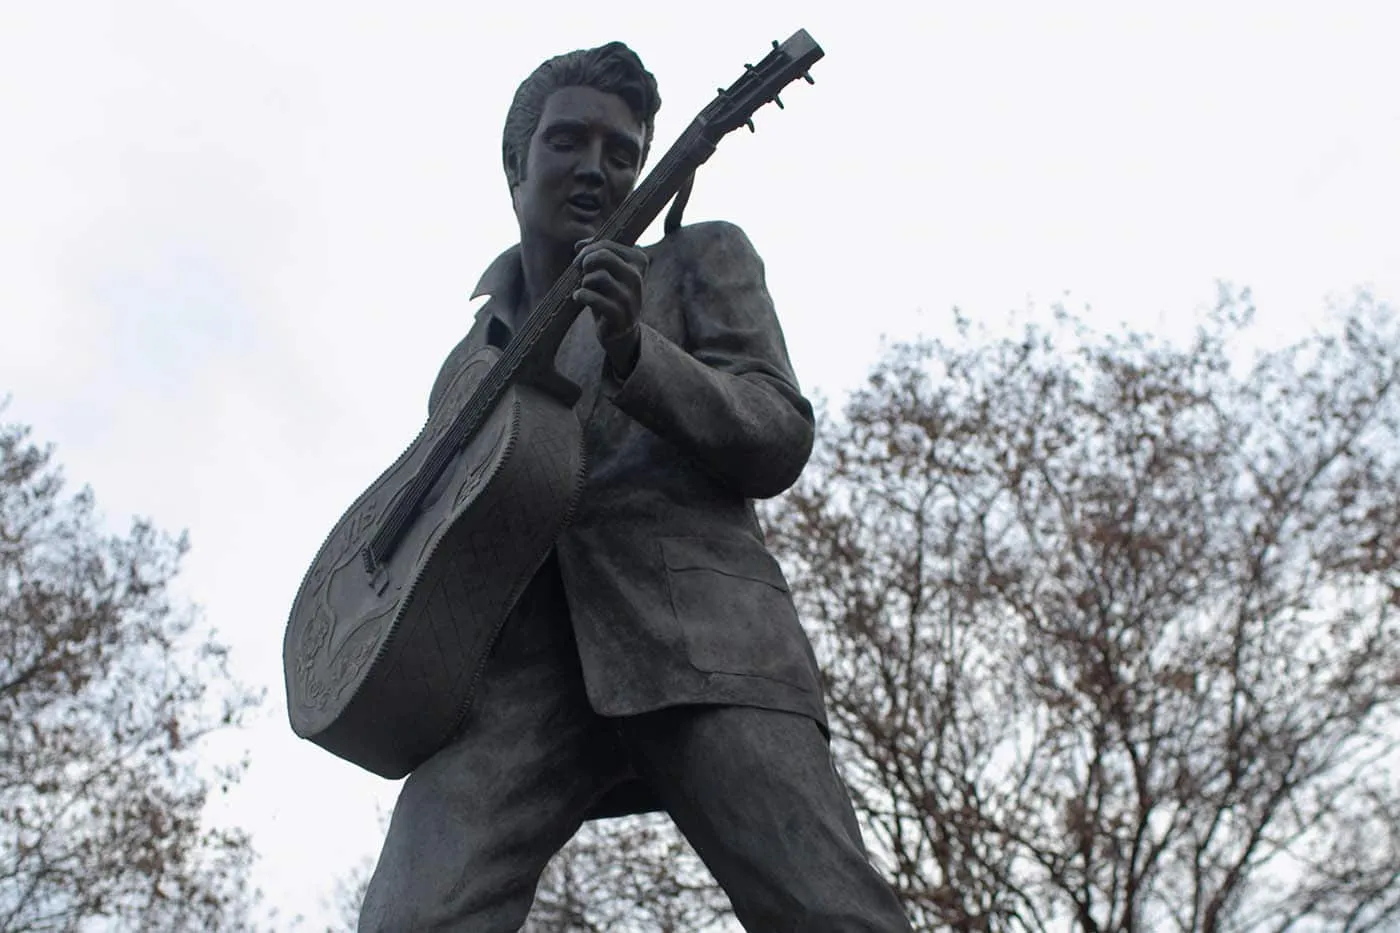 Statue of Elvis in Memphis, Tennessee